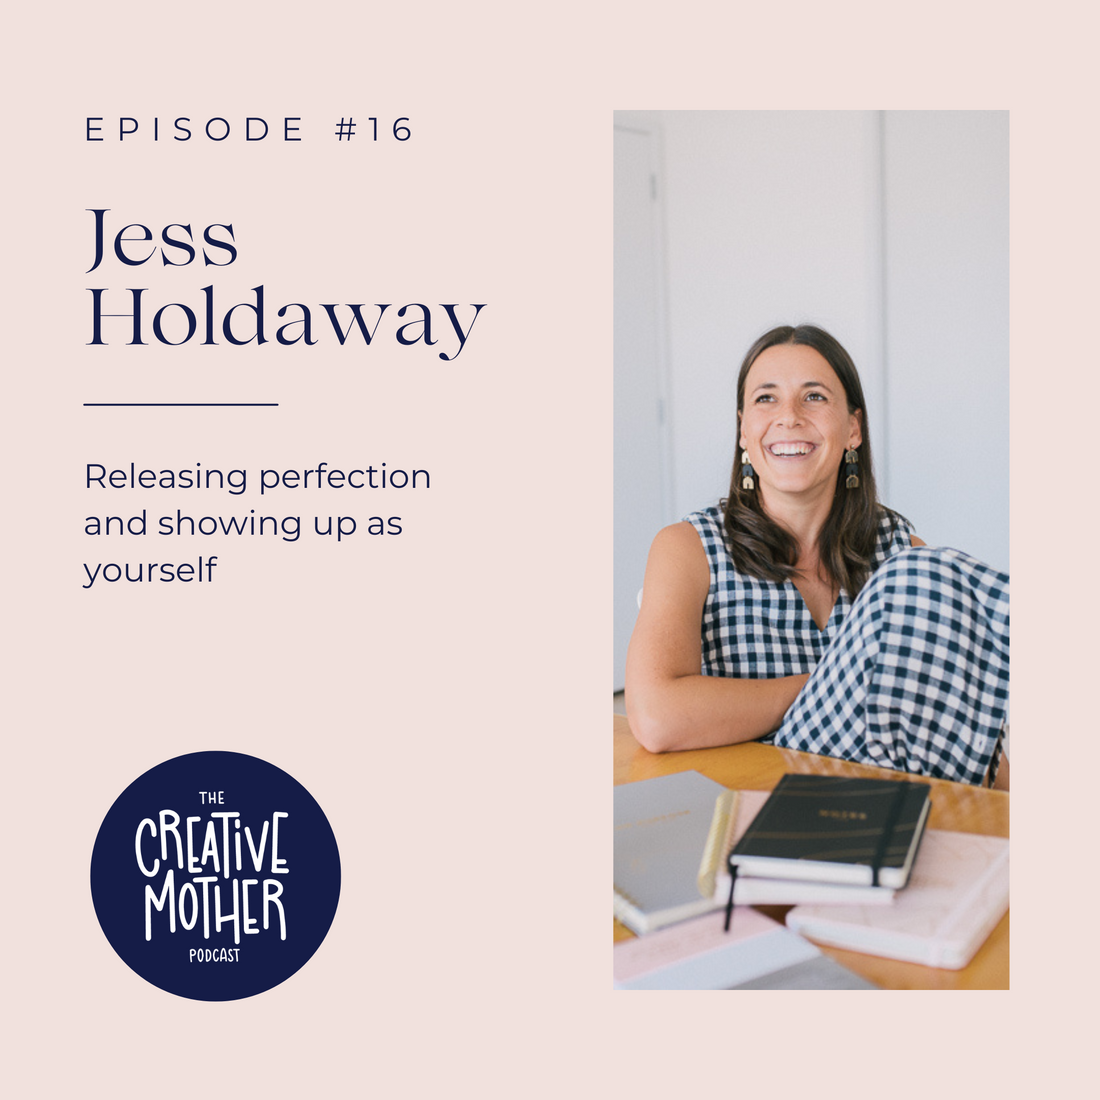 S2 E16: Releasing perfection and showing up as yourself with Jess Holdaway | Designer